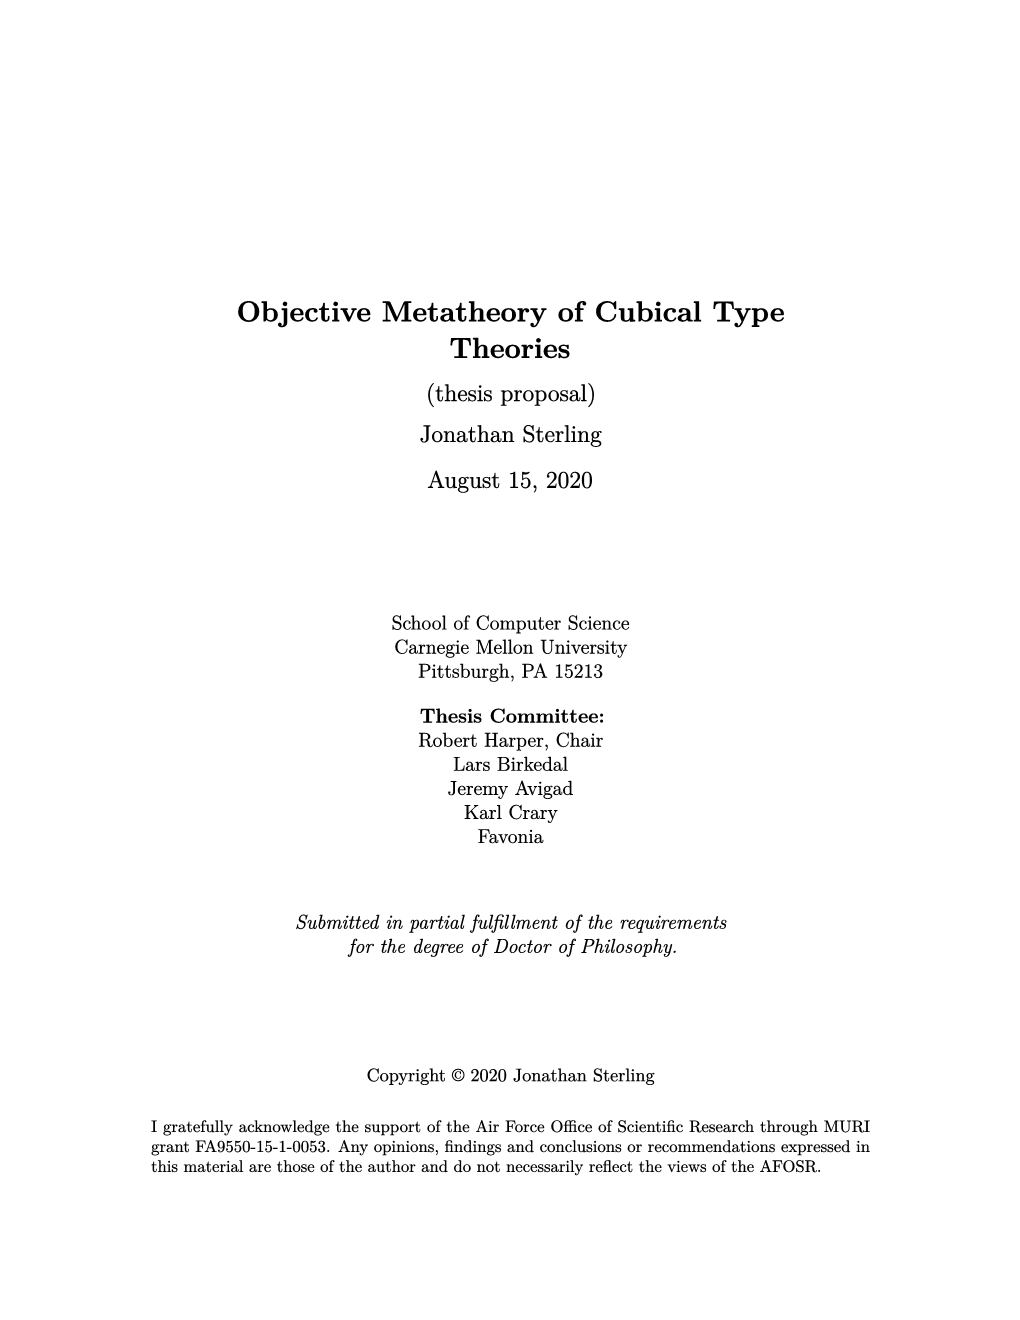 Objective Metatheory of Cubical Type Theories (Thesis Proposal) Jonathan Sterling August 15, 2020